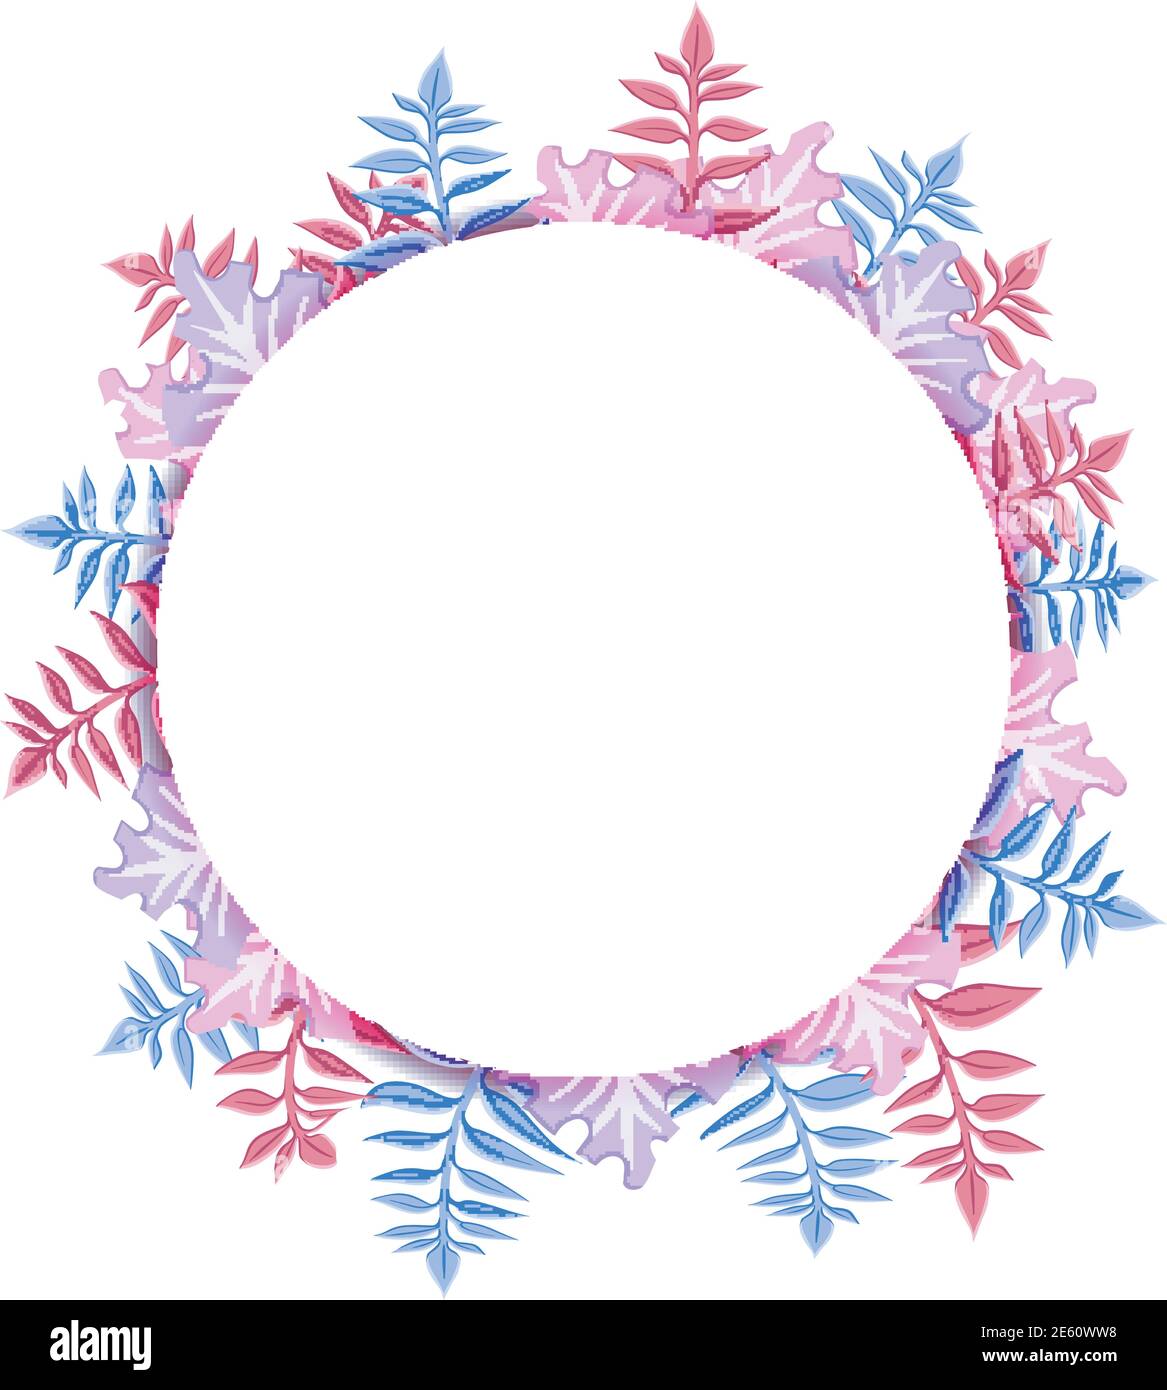 Tropical party invitation with palm leaves. Round frame. Vector illustration. Stock Vector